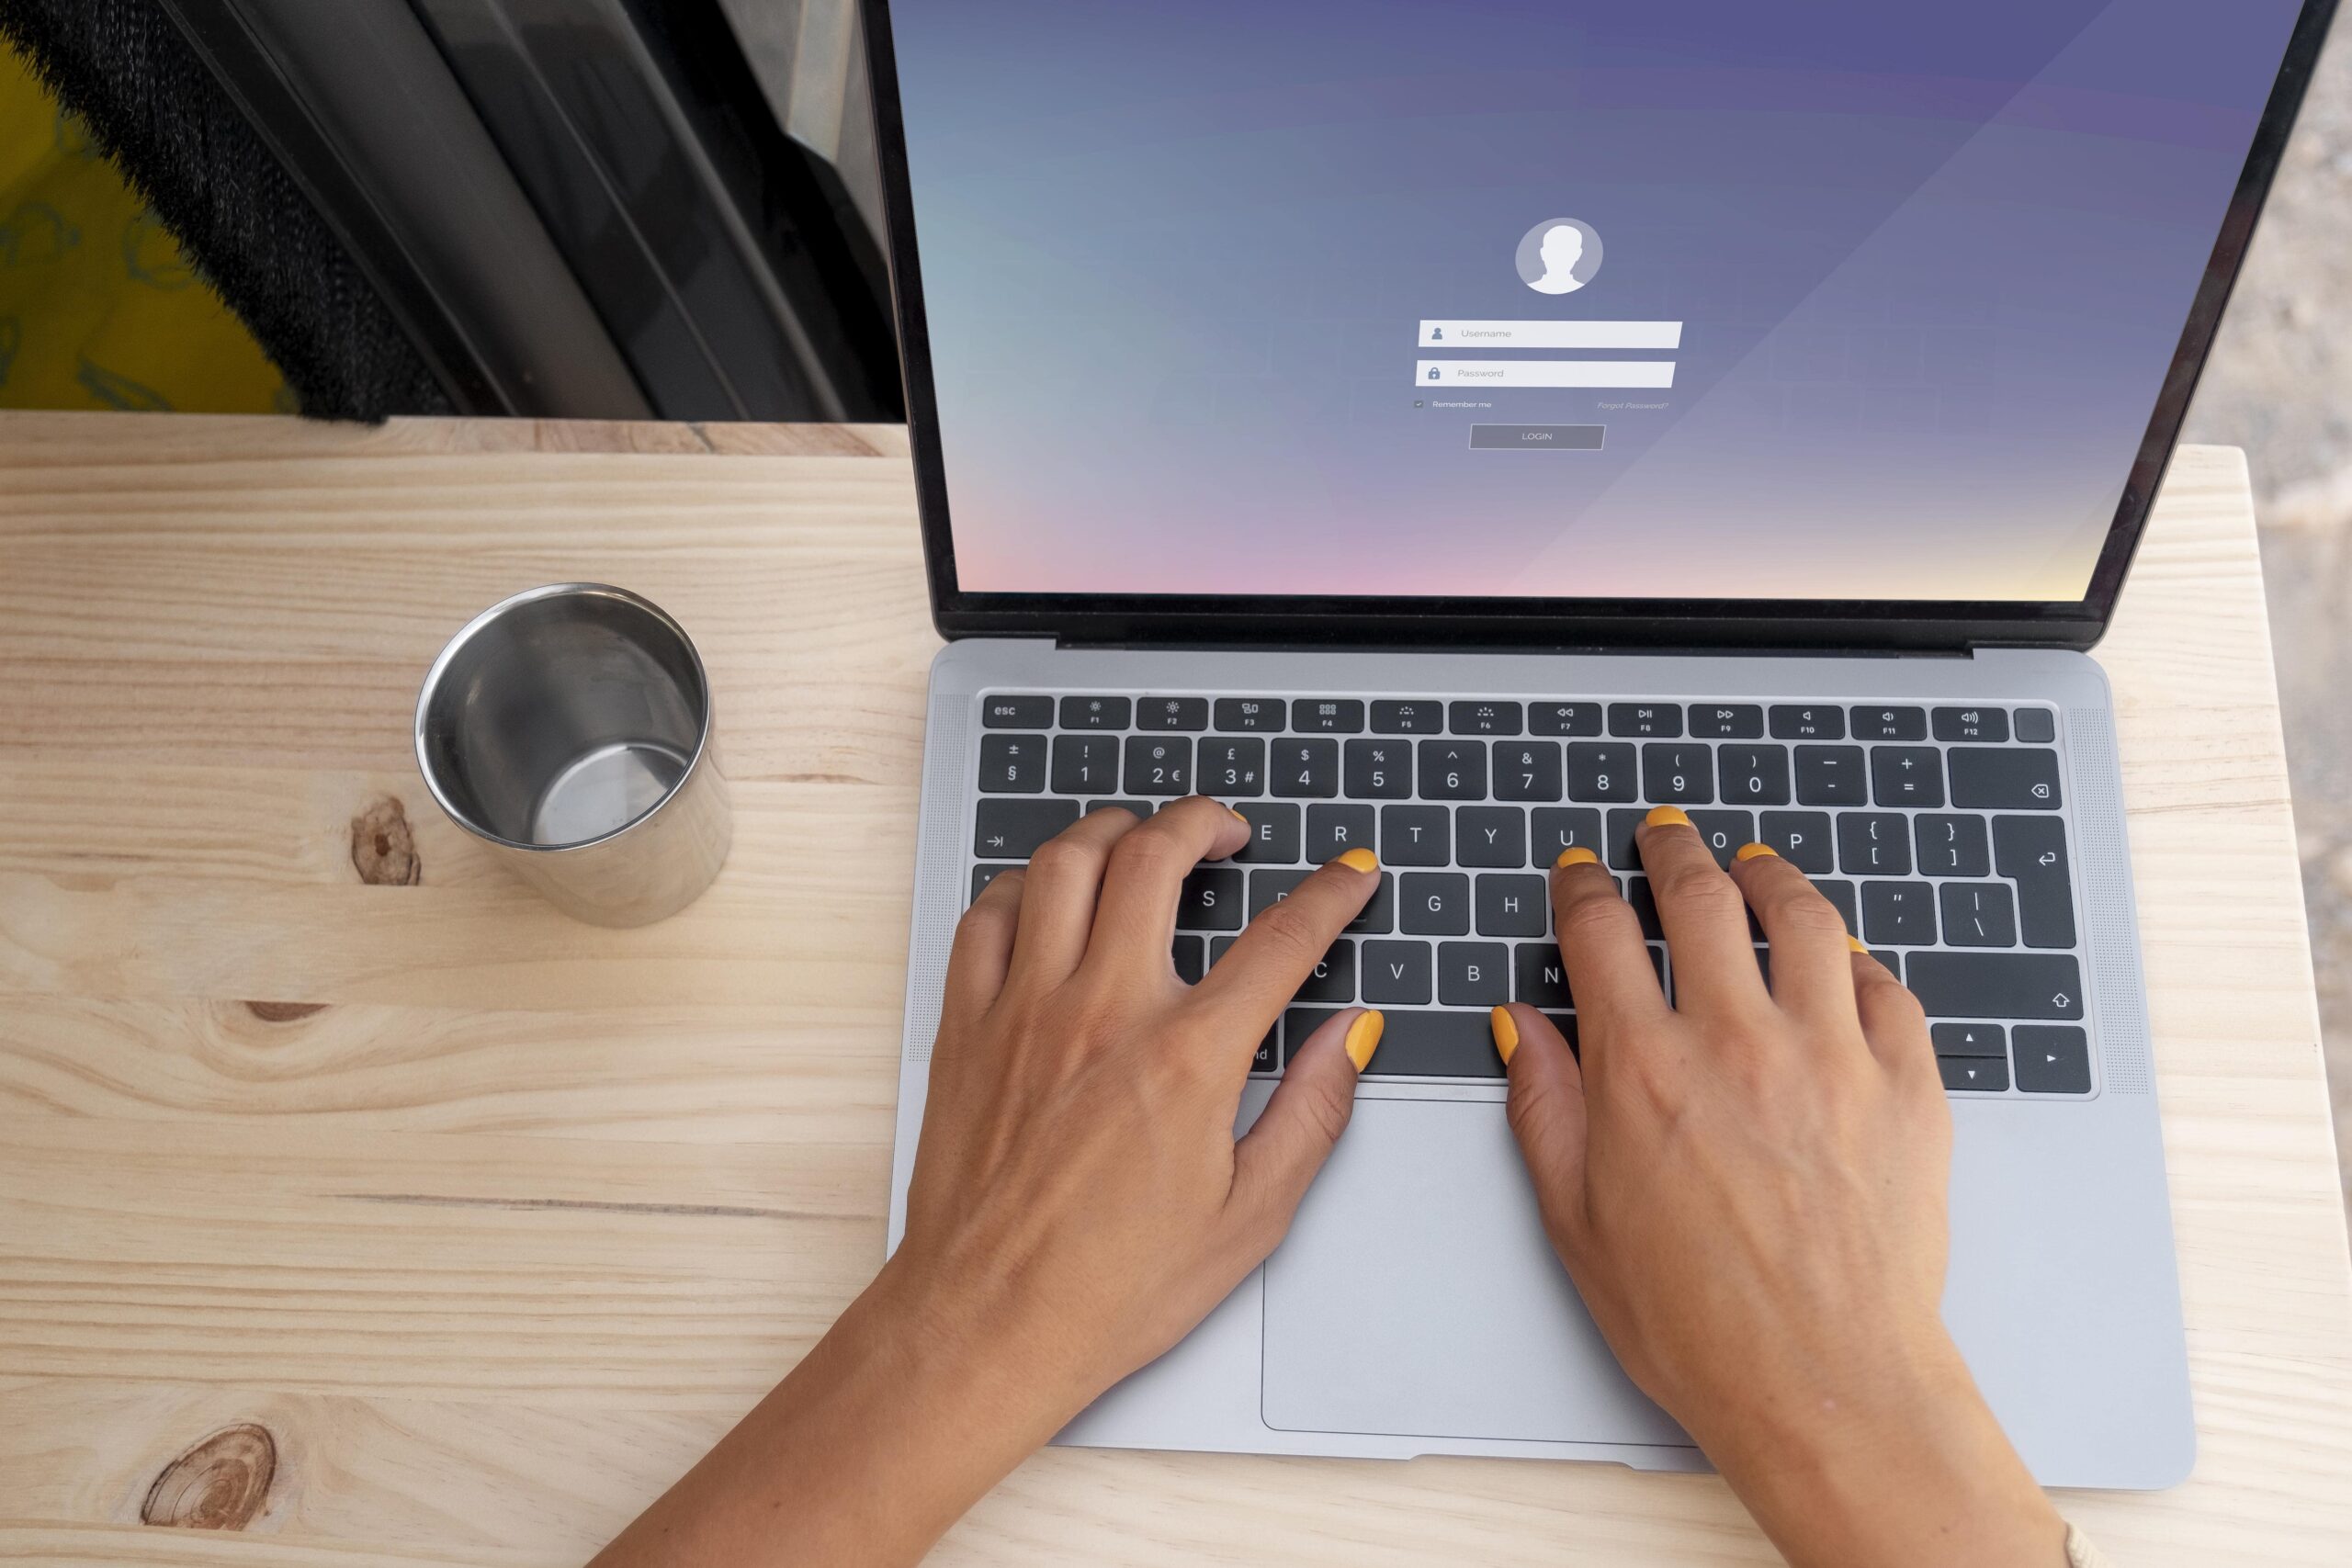 How to Find Saved Passwords on Mac and Beyond